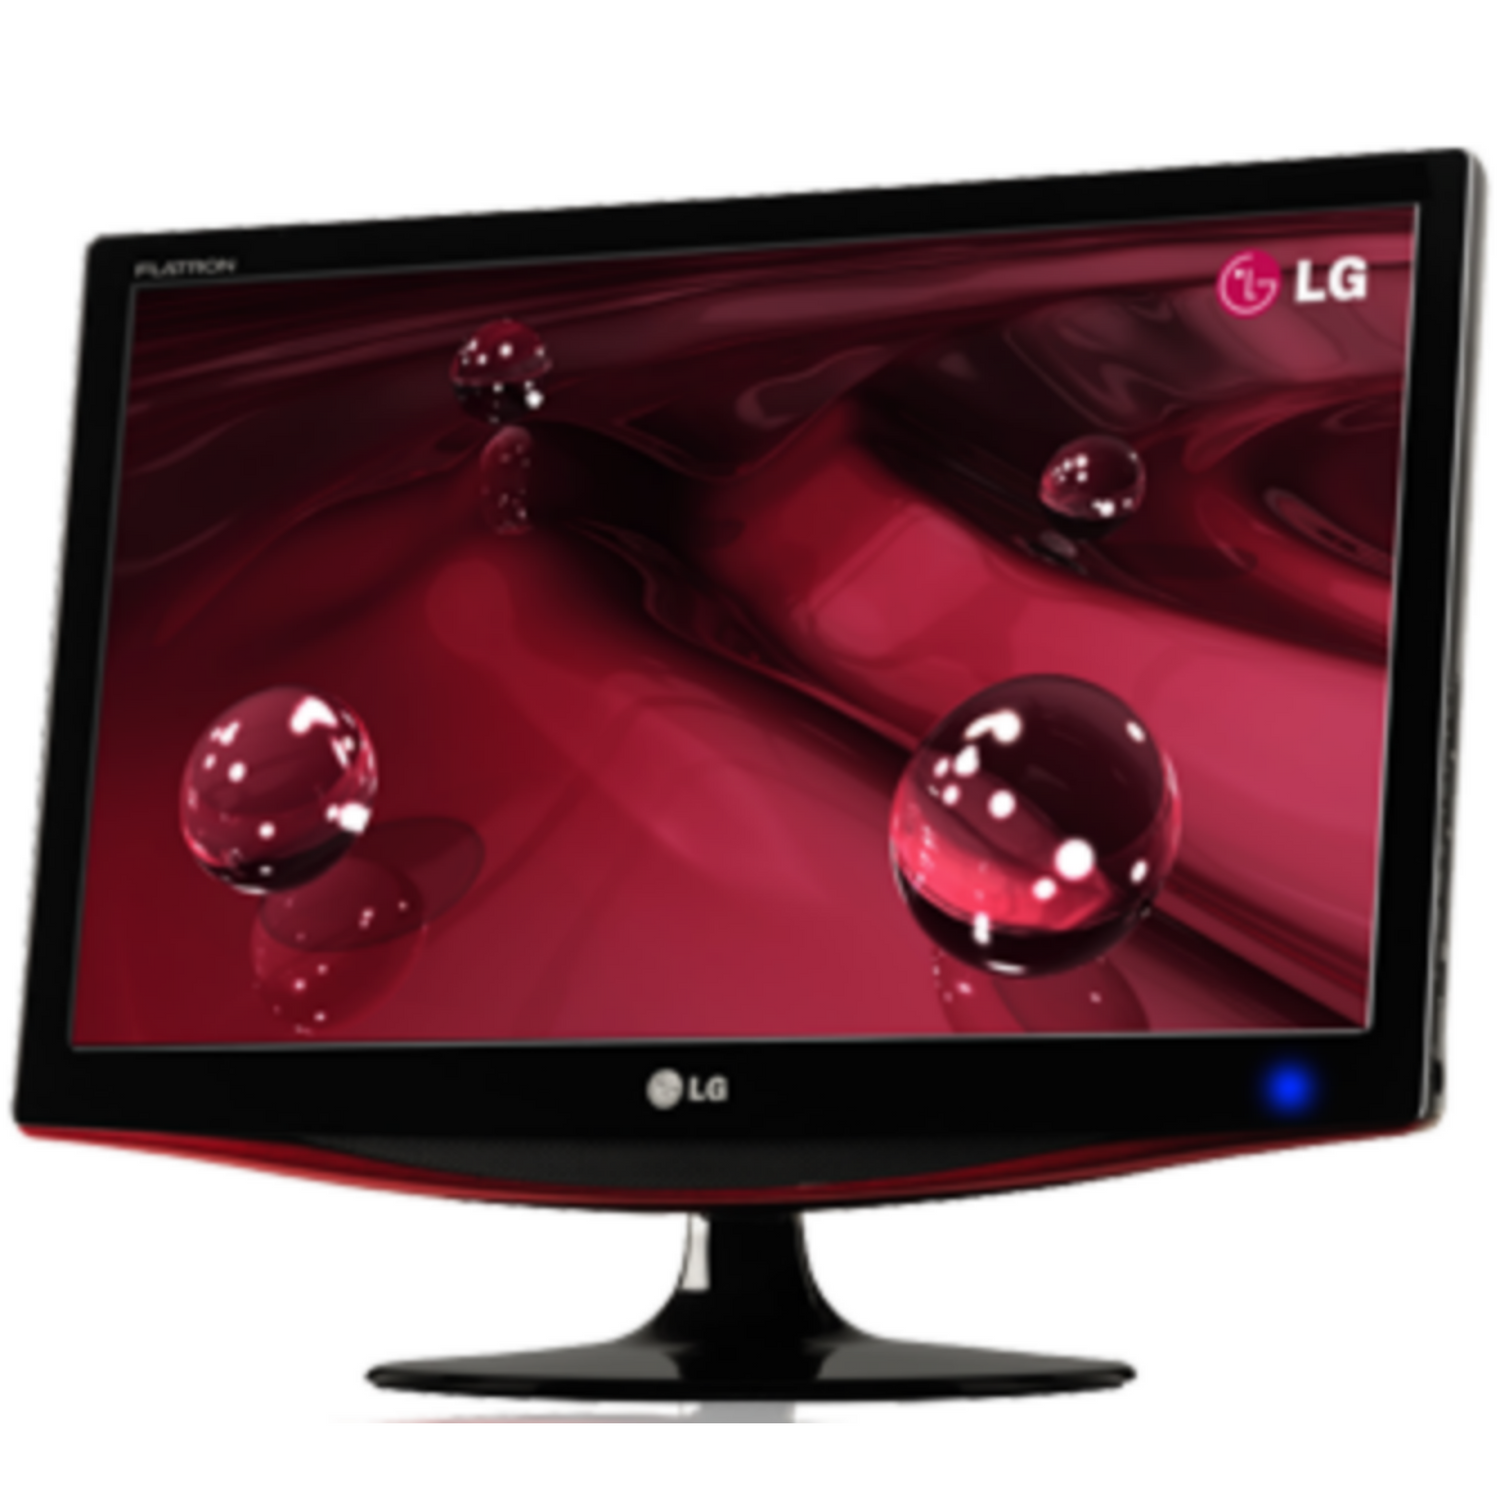 LG FOREIGN USED TVS – IFESOLOX